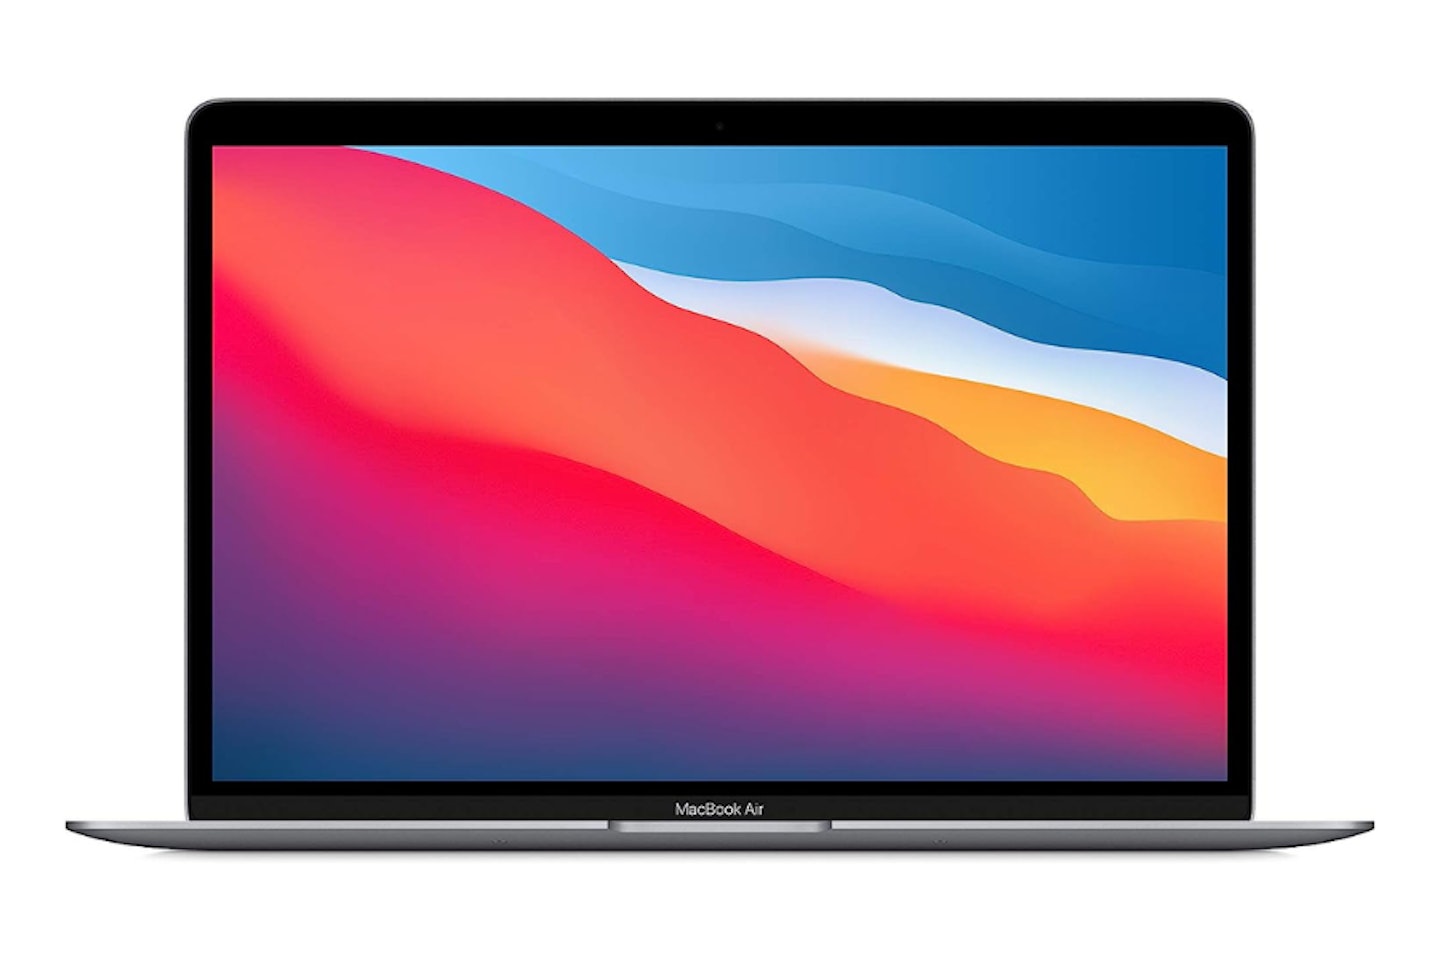  Apple 2020 MacBook Air - possibly the best student laptop